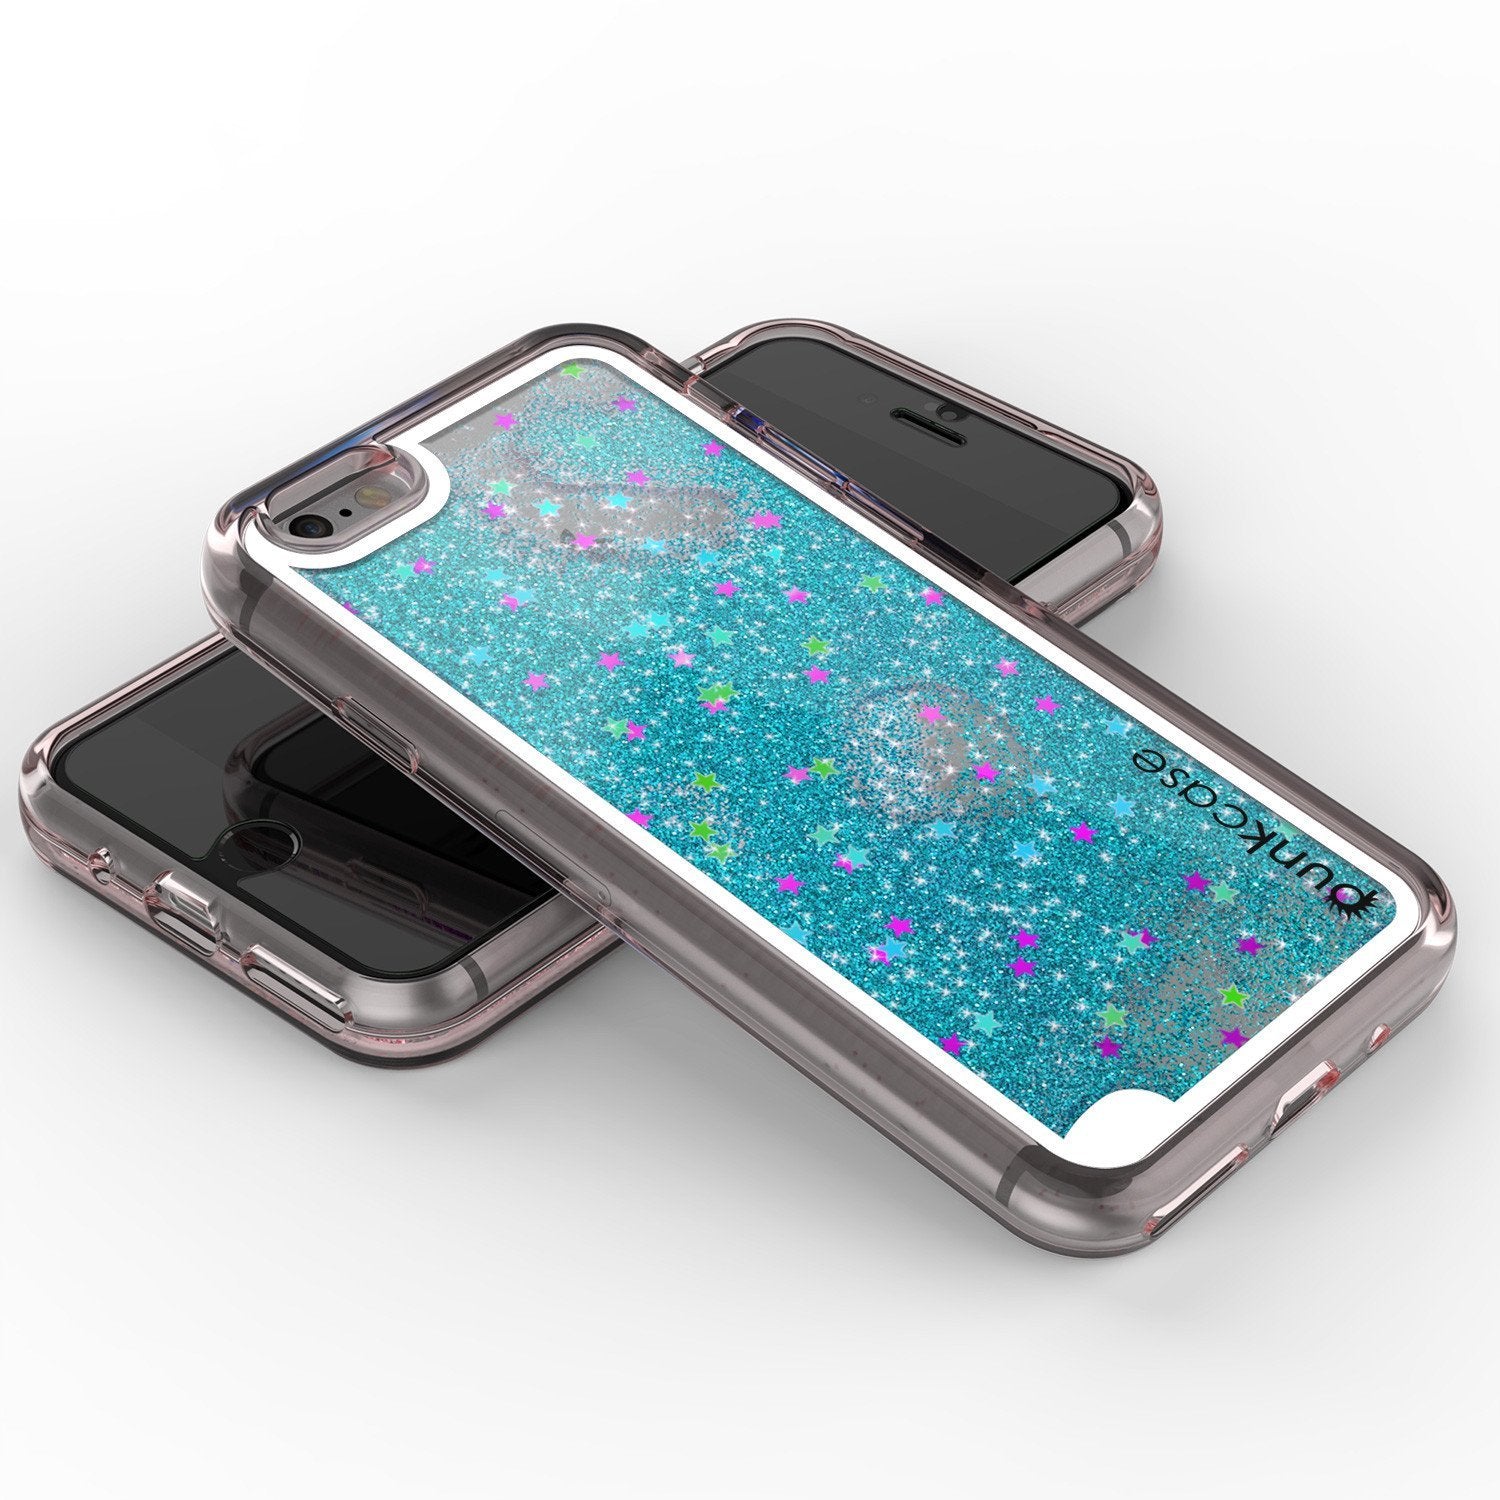 iPhone 8 Case, PunkCase LIQUID Teal Series, Protective Dual Layer Floating Glitter Cover - PunkCase NZ